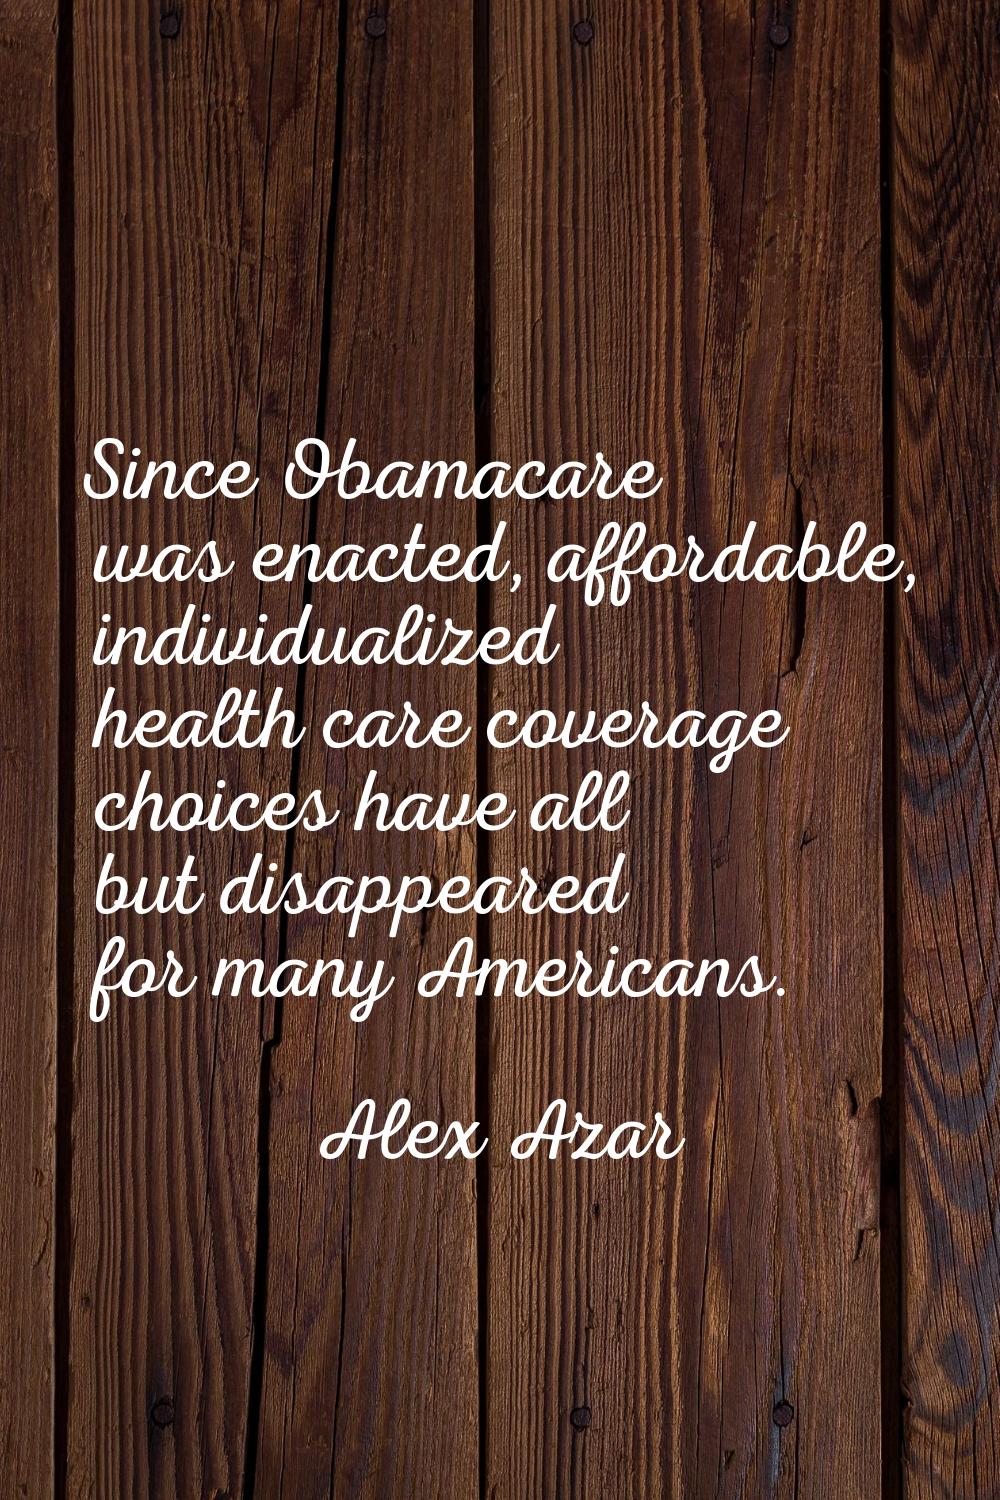 Since Obamacare was enacted, affordable, individualized health care coverage choices have all but d